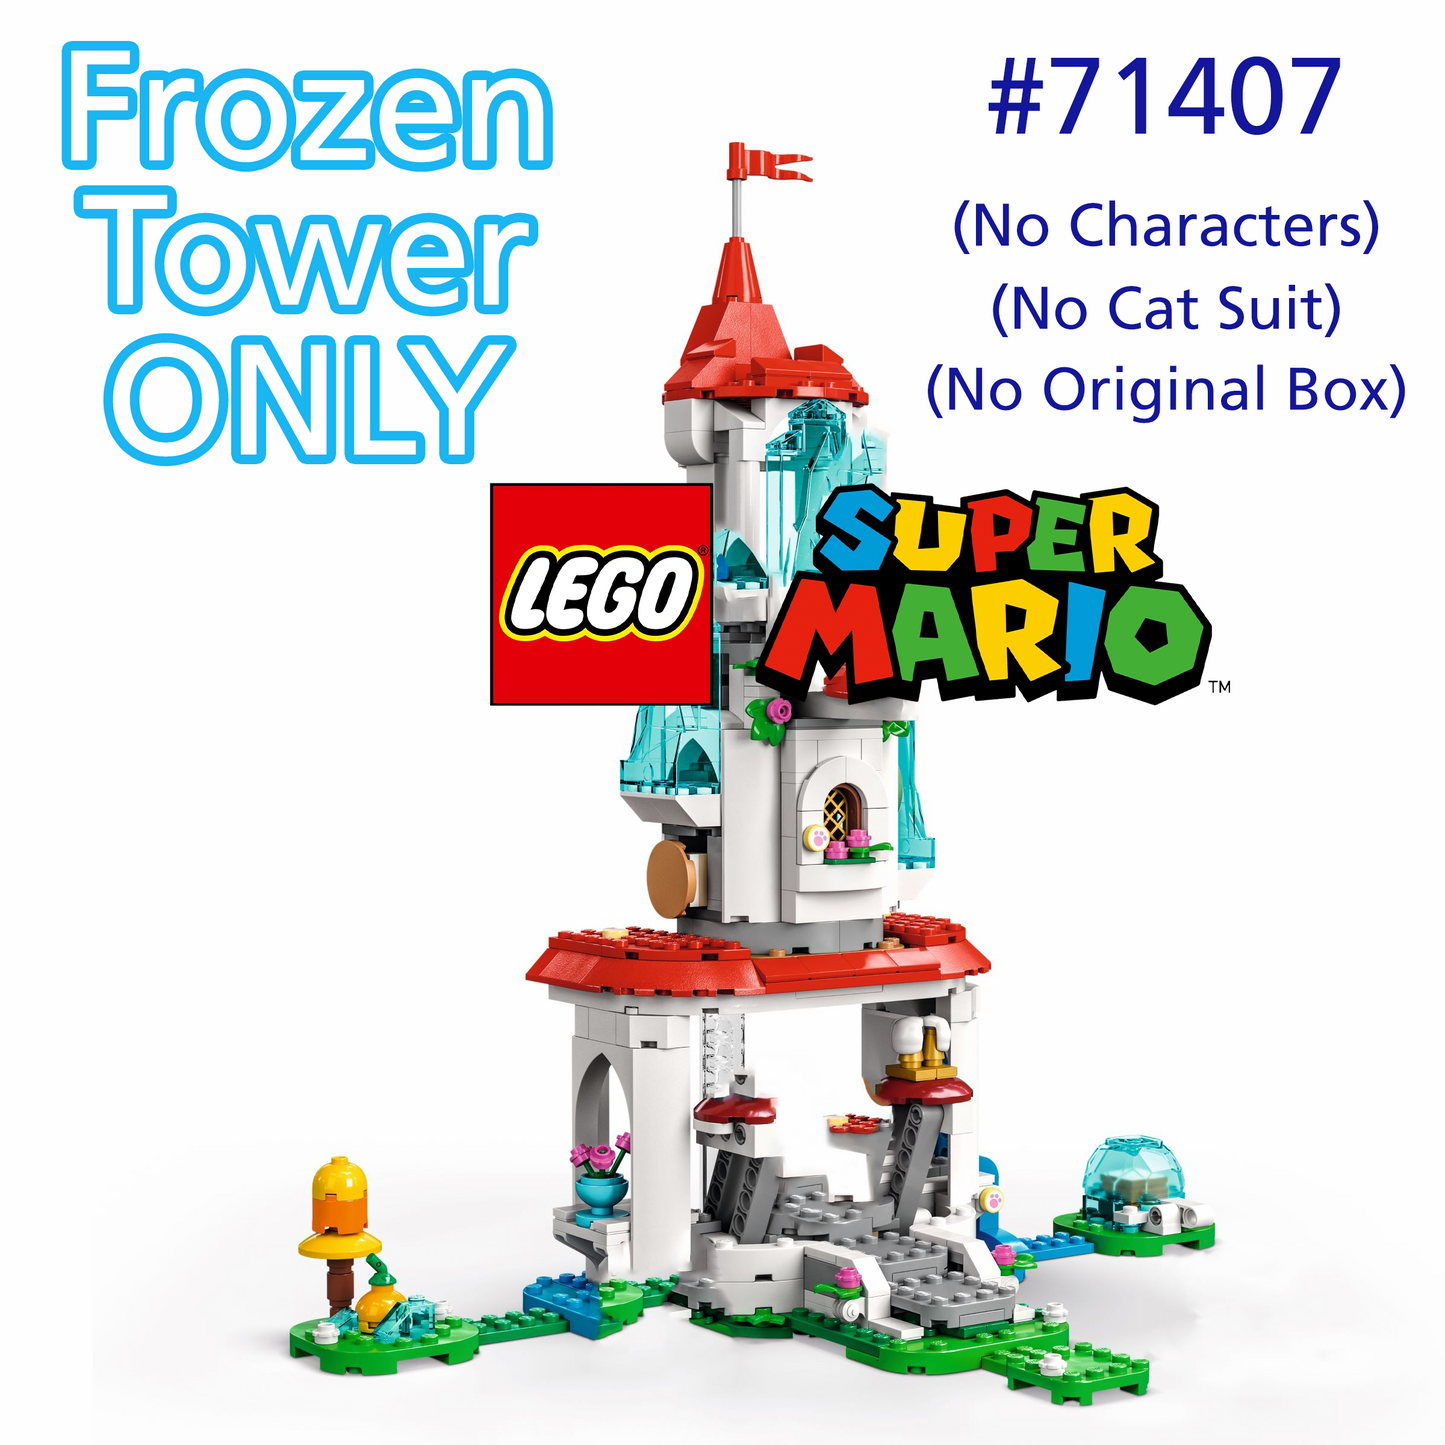 LEGO Peach FROZEN TOWER ONLY from #71407 - LEGO Super Mario (NEW) NO CHARACTERS!